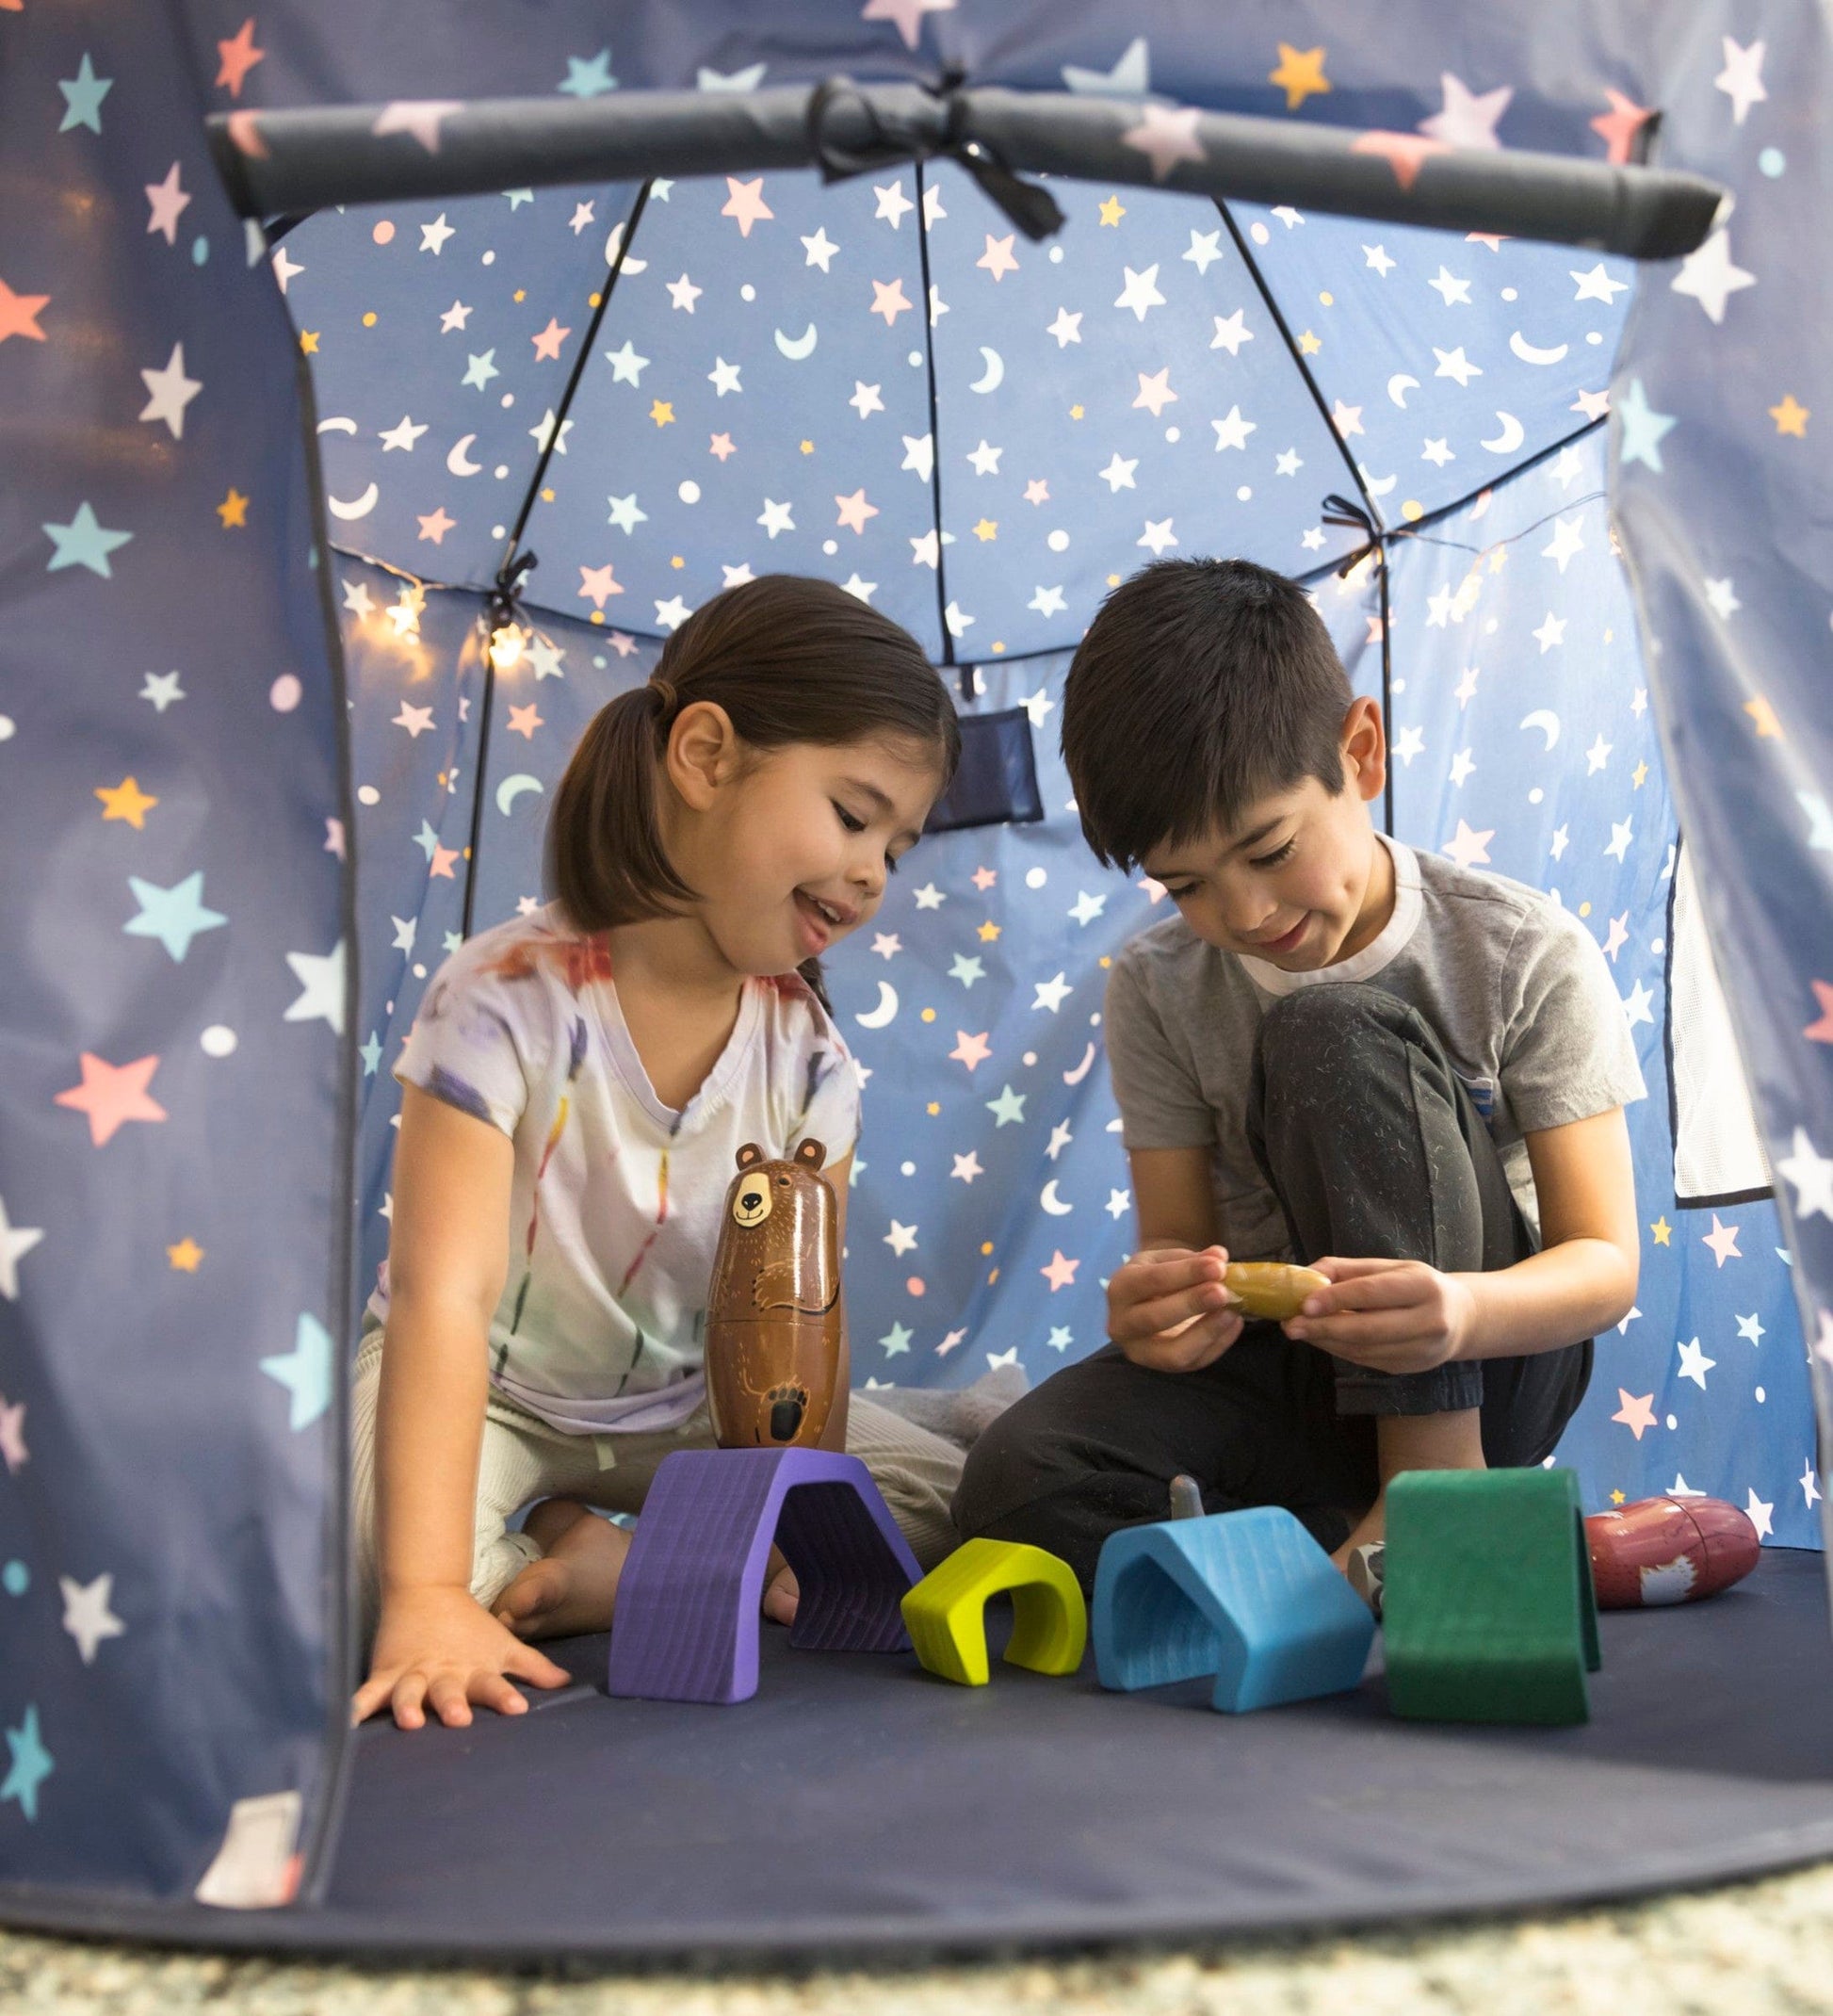 53-Inch Celestial Pop-Up Play Tent with Lights